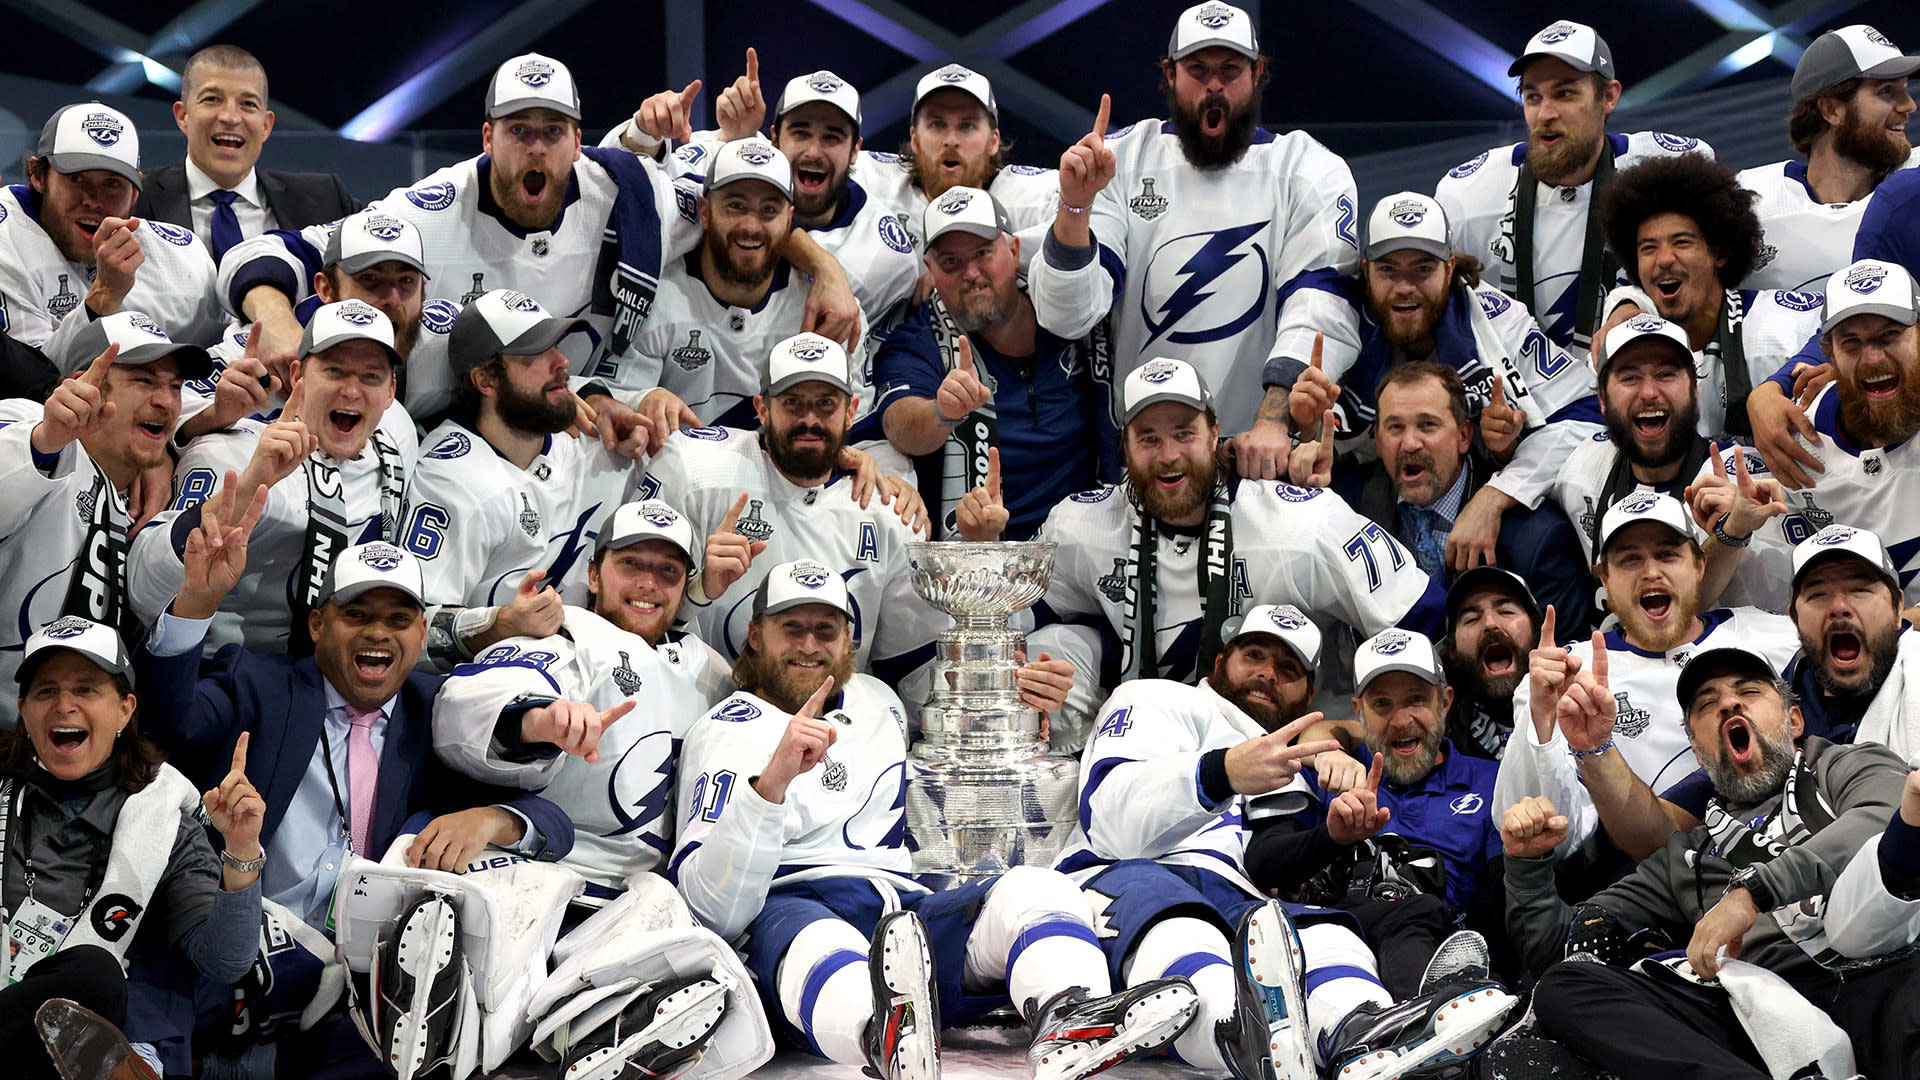 Tampa Bay Lightning win Stanley Cup over Dallas Stars in Game 6